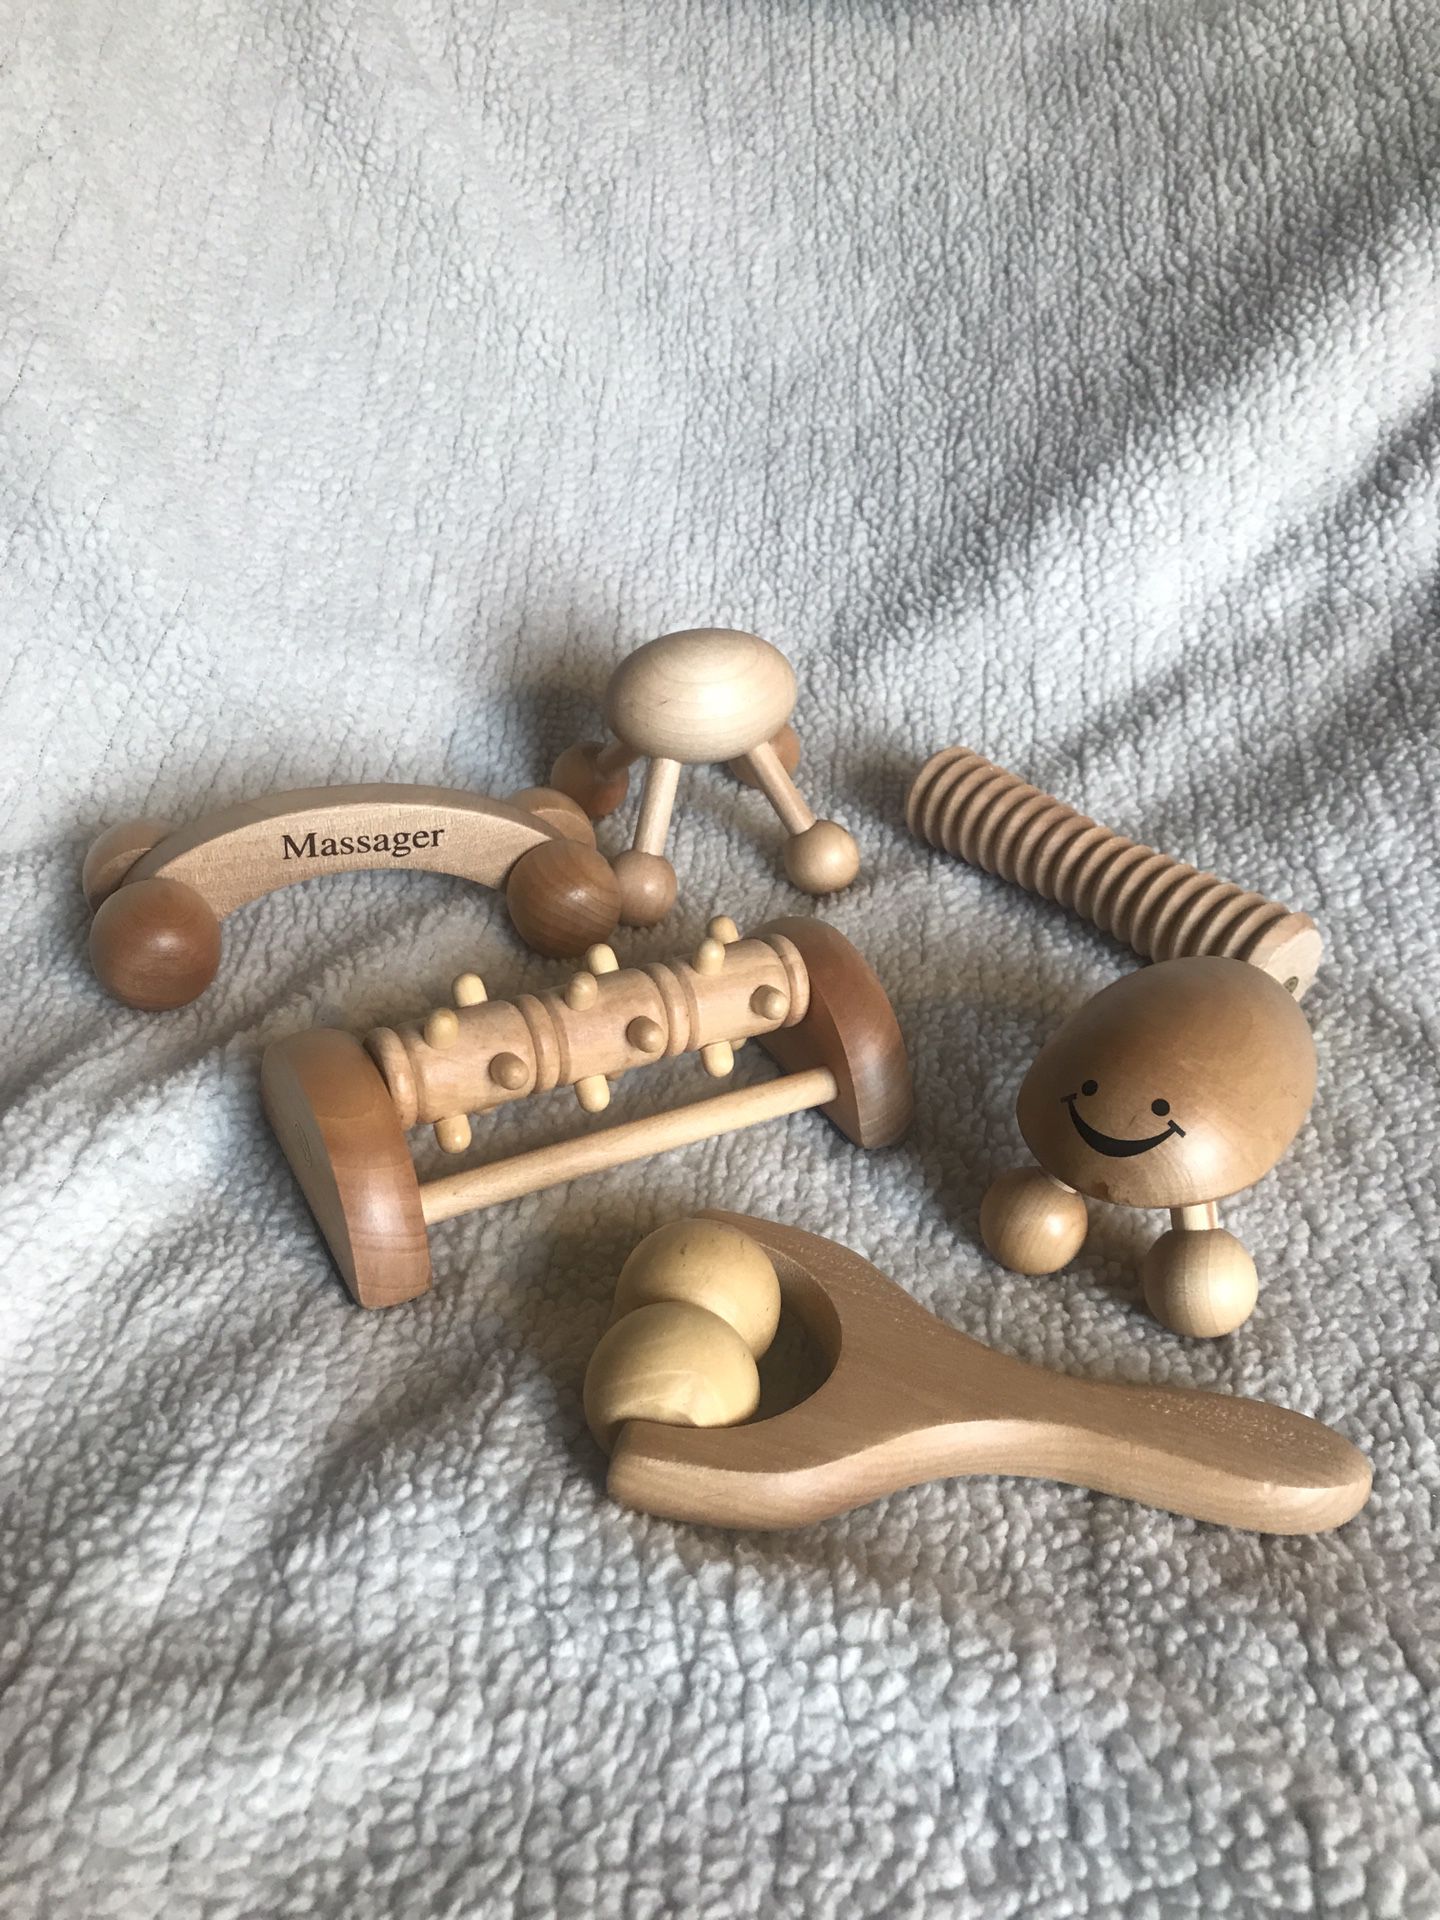 6 Lot of Wooden Hand Massagers For The Total Body By Essential Designs